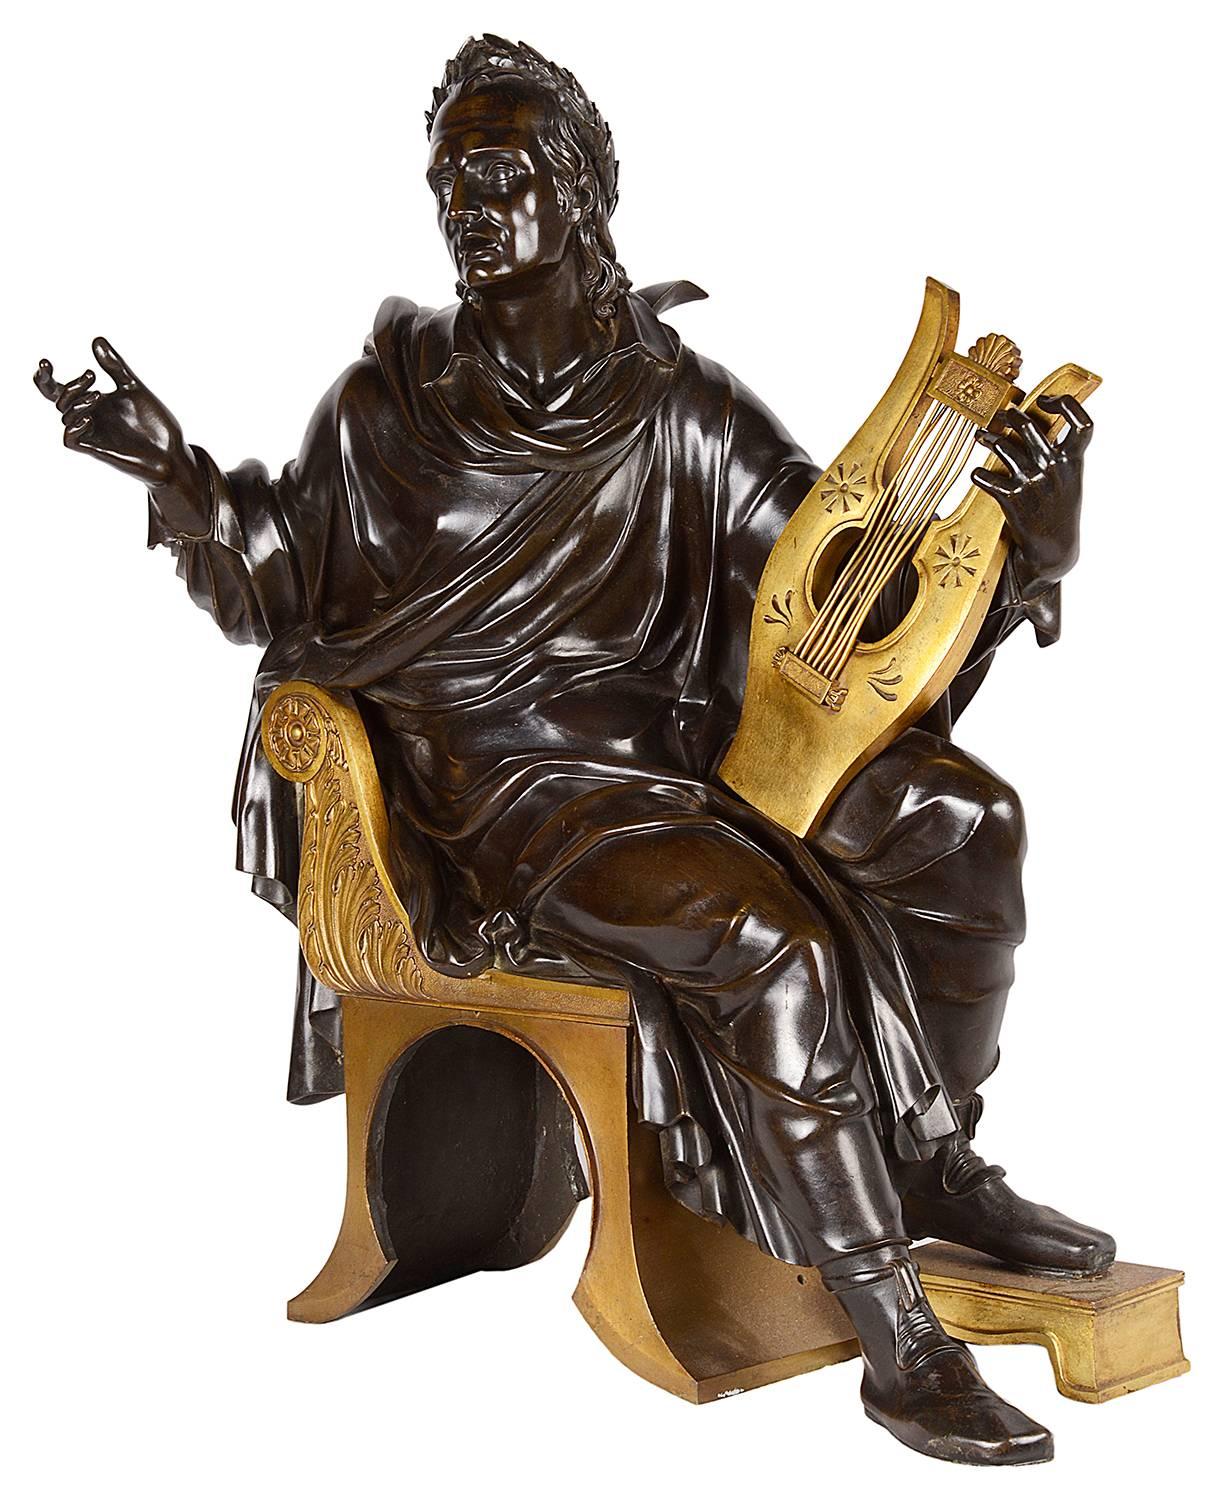 An impressive 19th century bronze statue of a neoclassical musician, seated on a gilded classical chair playing a harp.